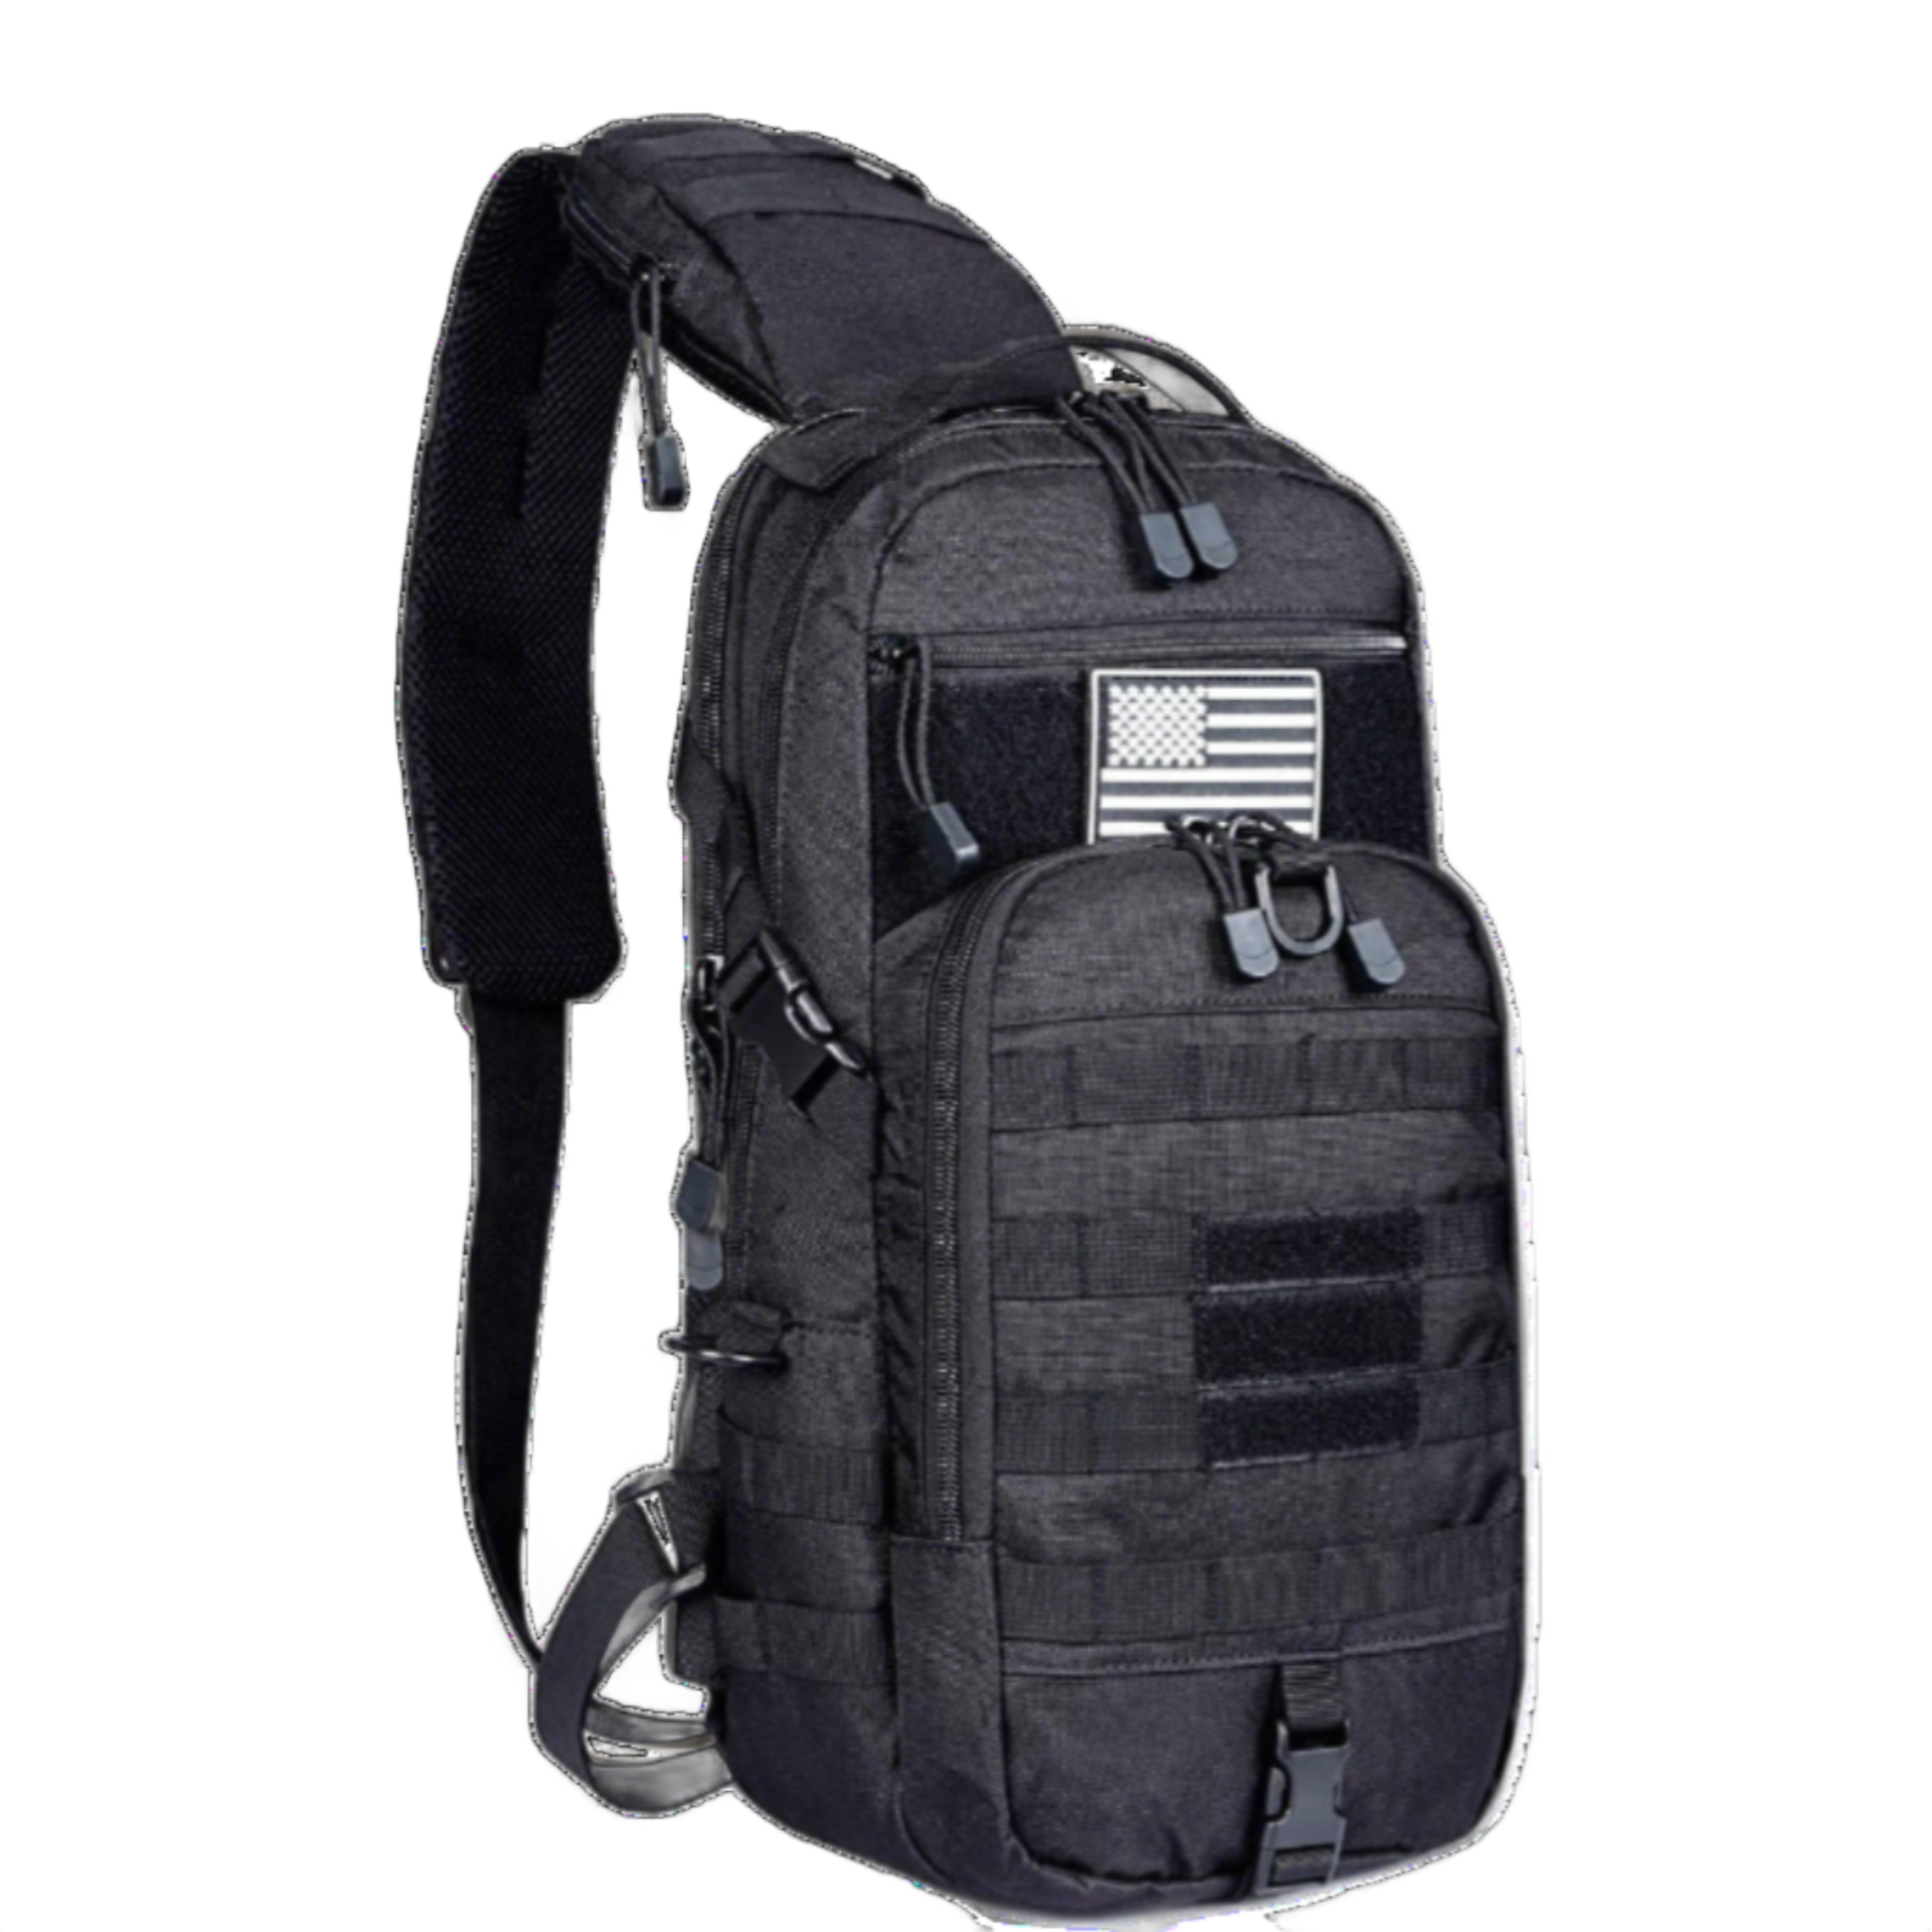 FR Fashion Co. 13" Men's MOLLE Tactical Crossbody Sling Backpack